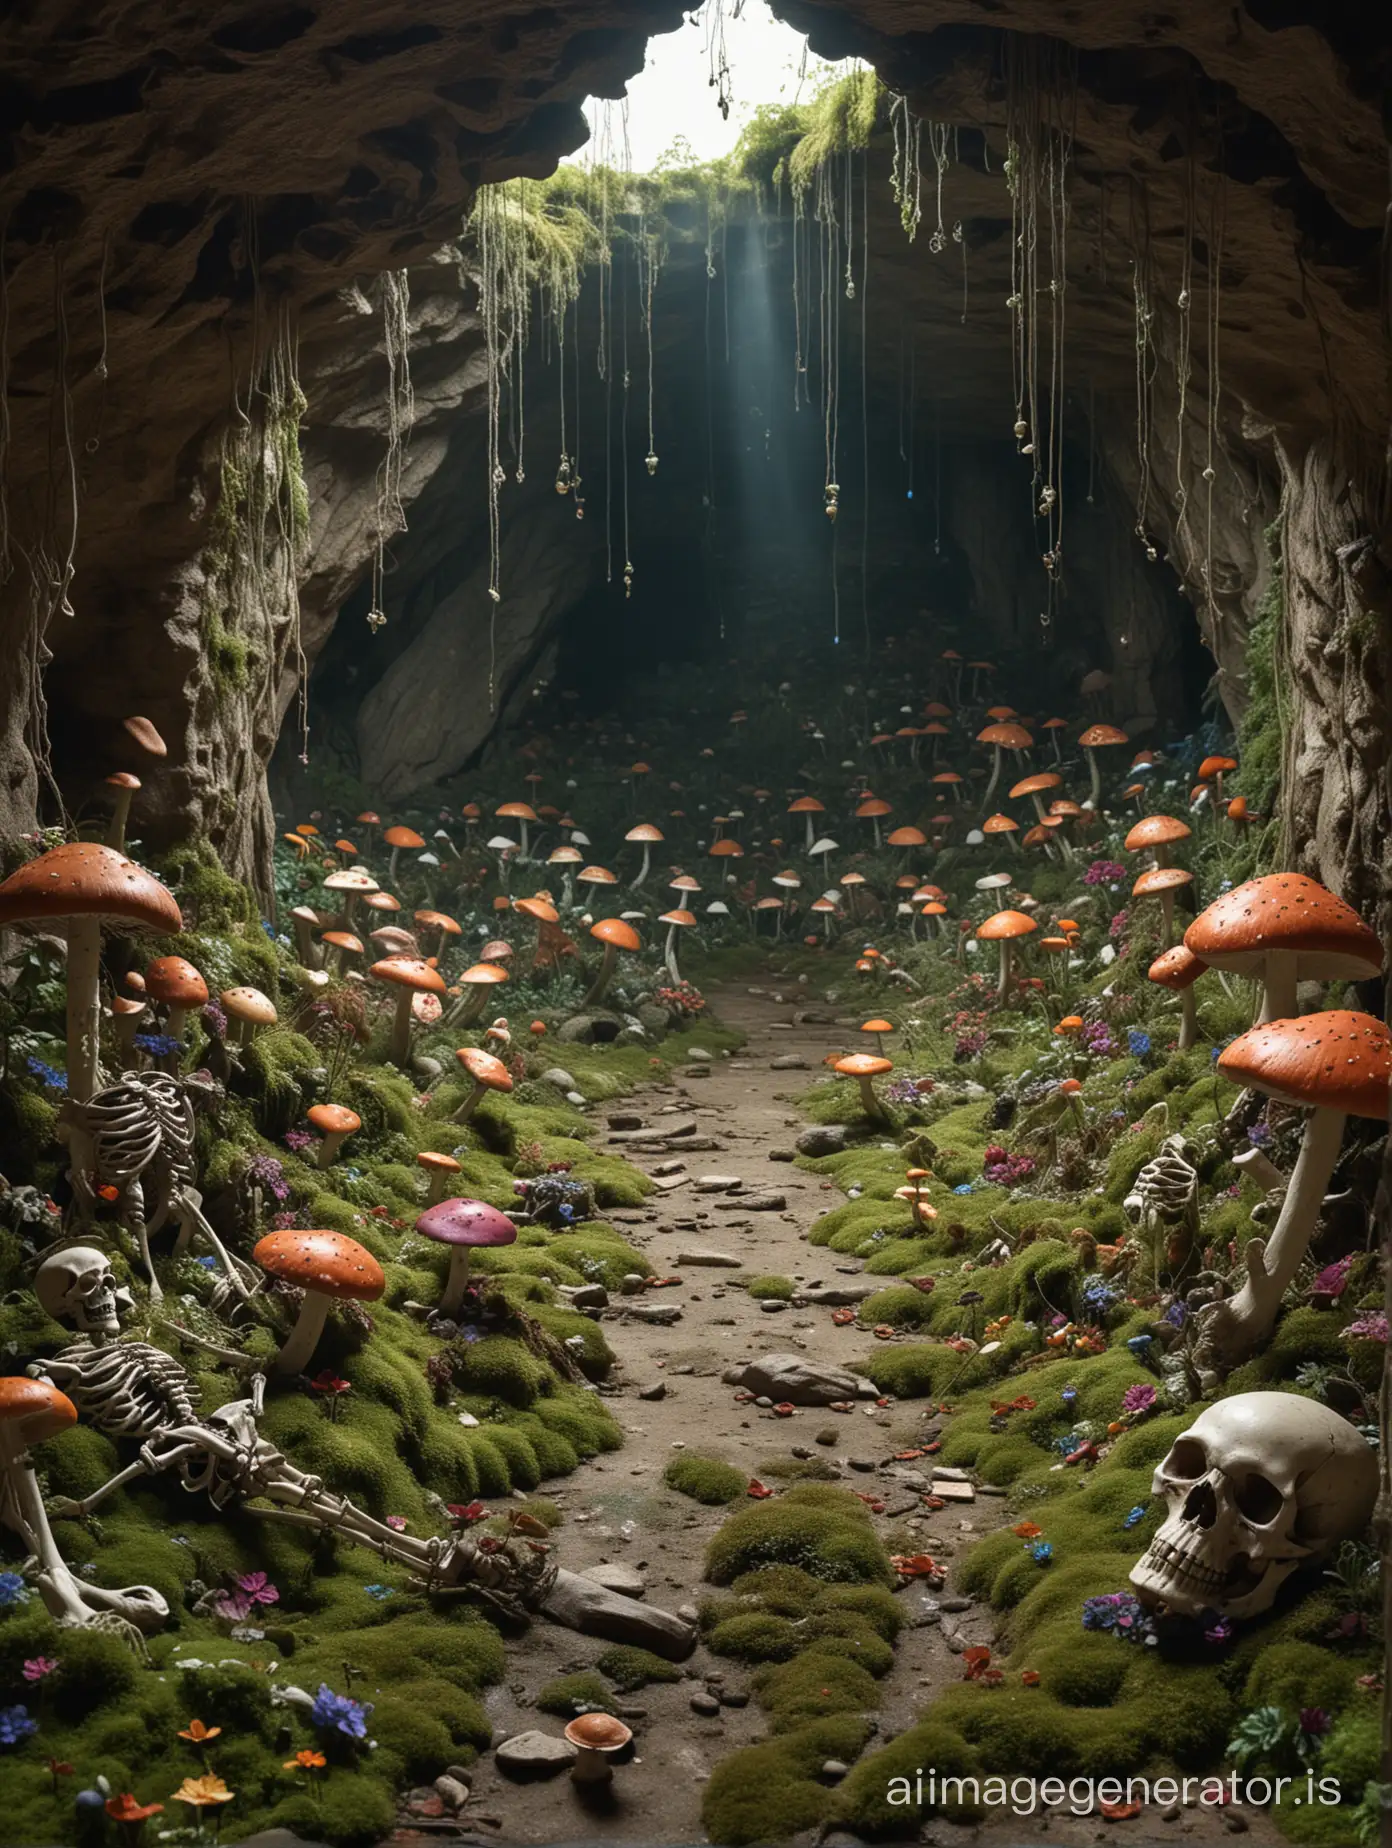 party of fantasy adventurers are repelling down a rope into an old underground cave. [skeleton] bones, armor, weapons scattered around the floor. moss and giant colorful mushrooms on floor and walls. only light source is a from the viewer